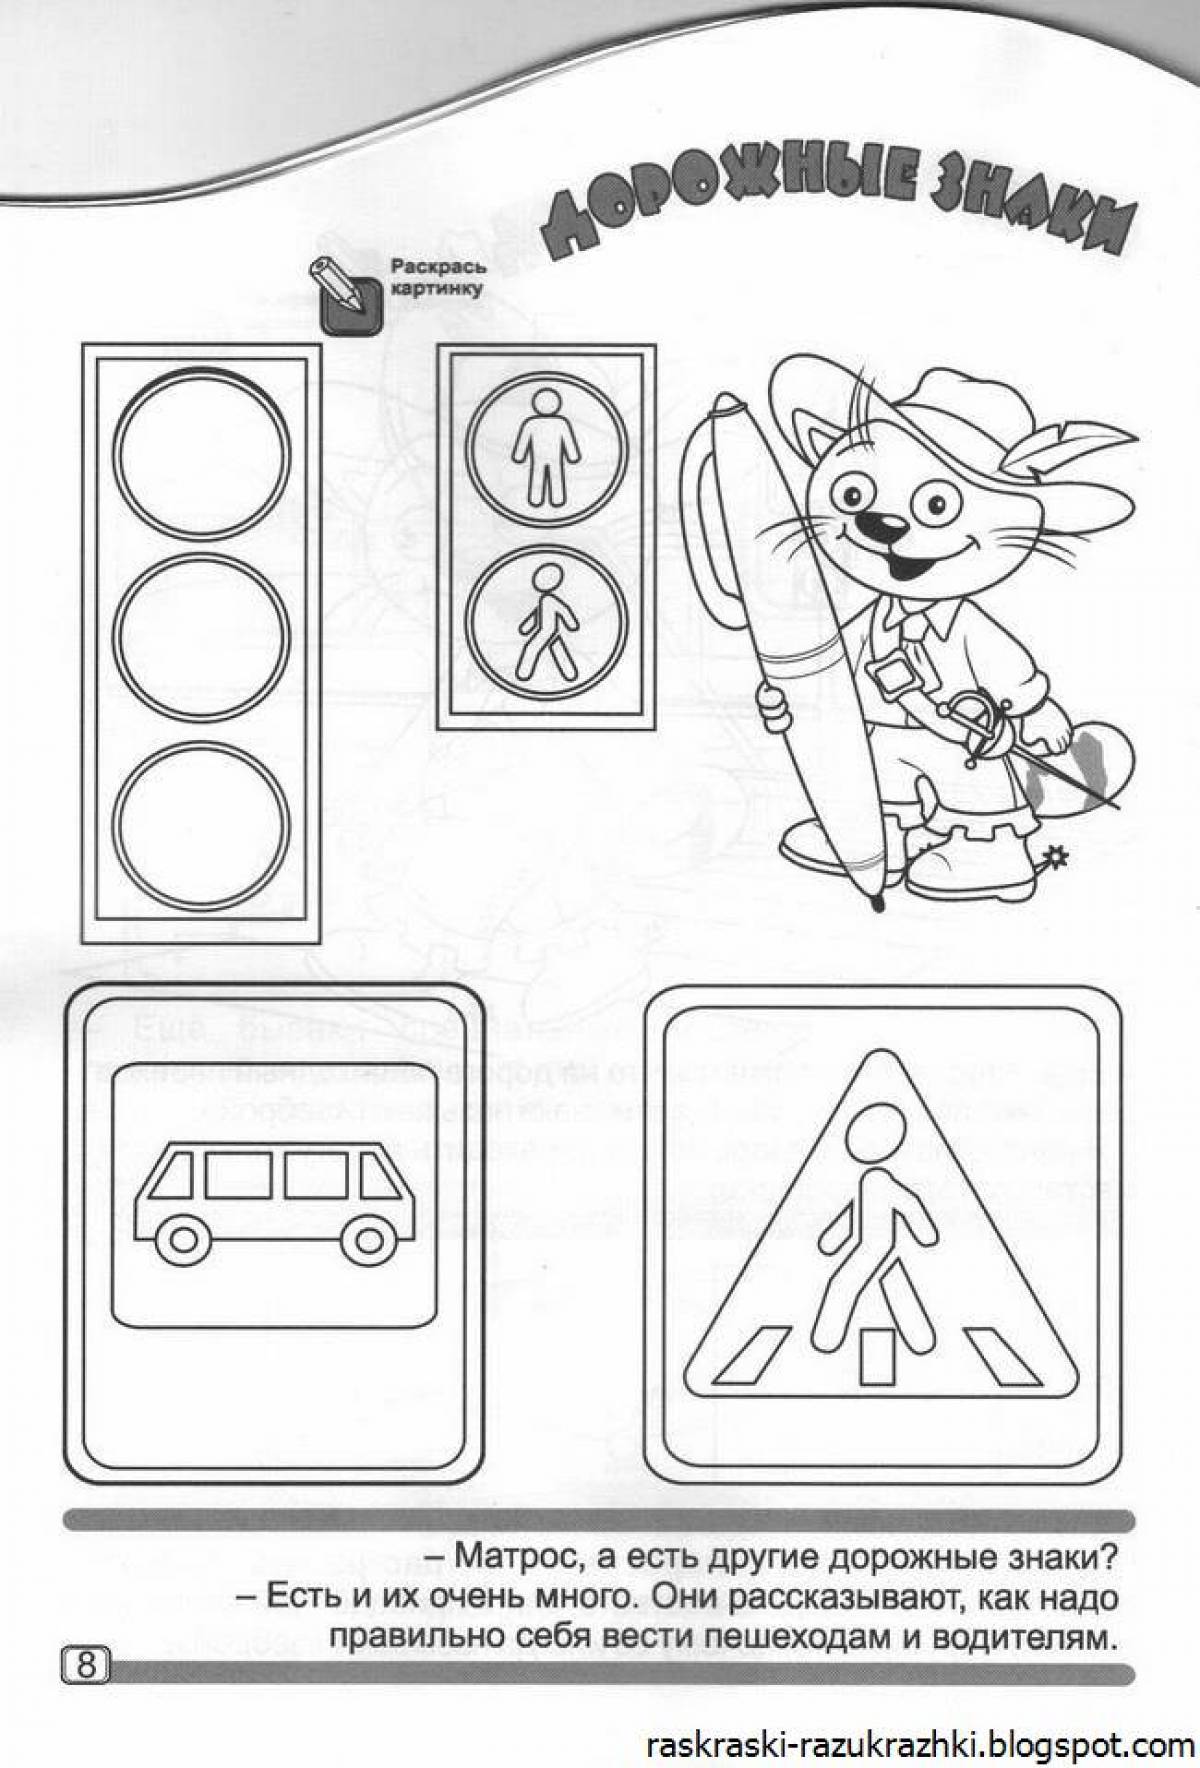 Coloring page stimulating rules of the road